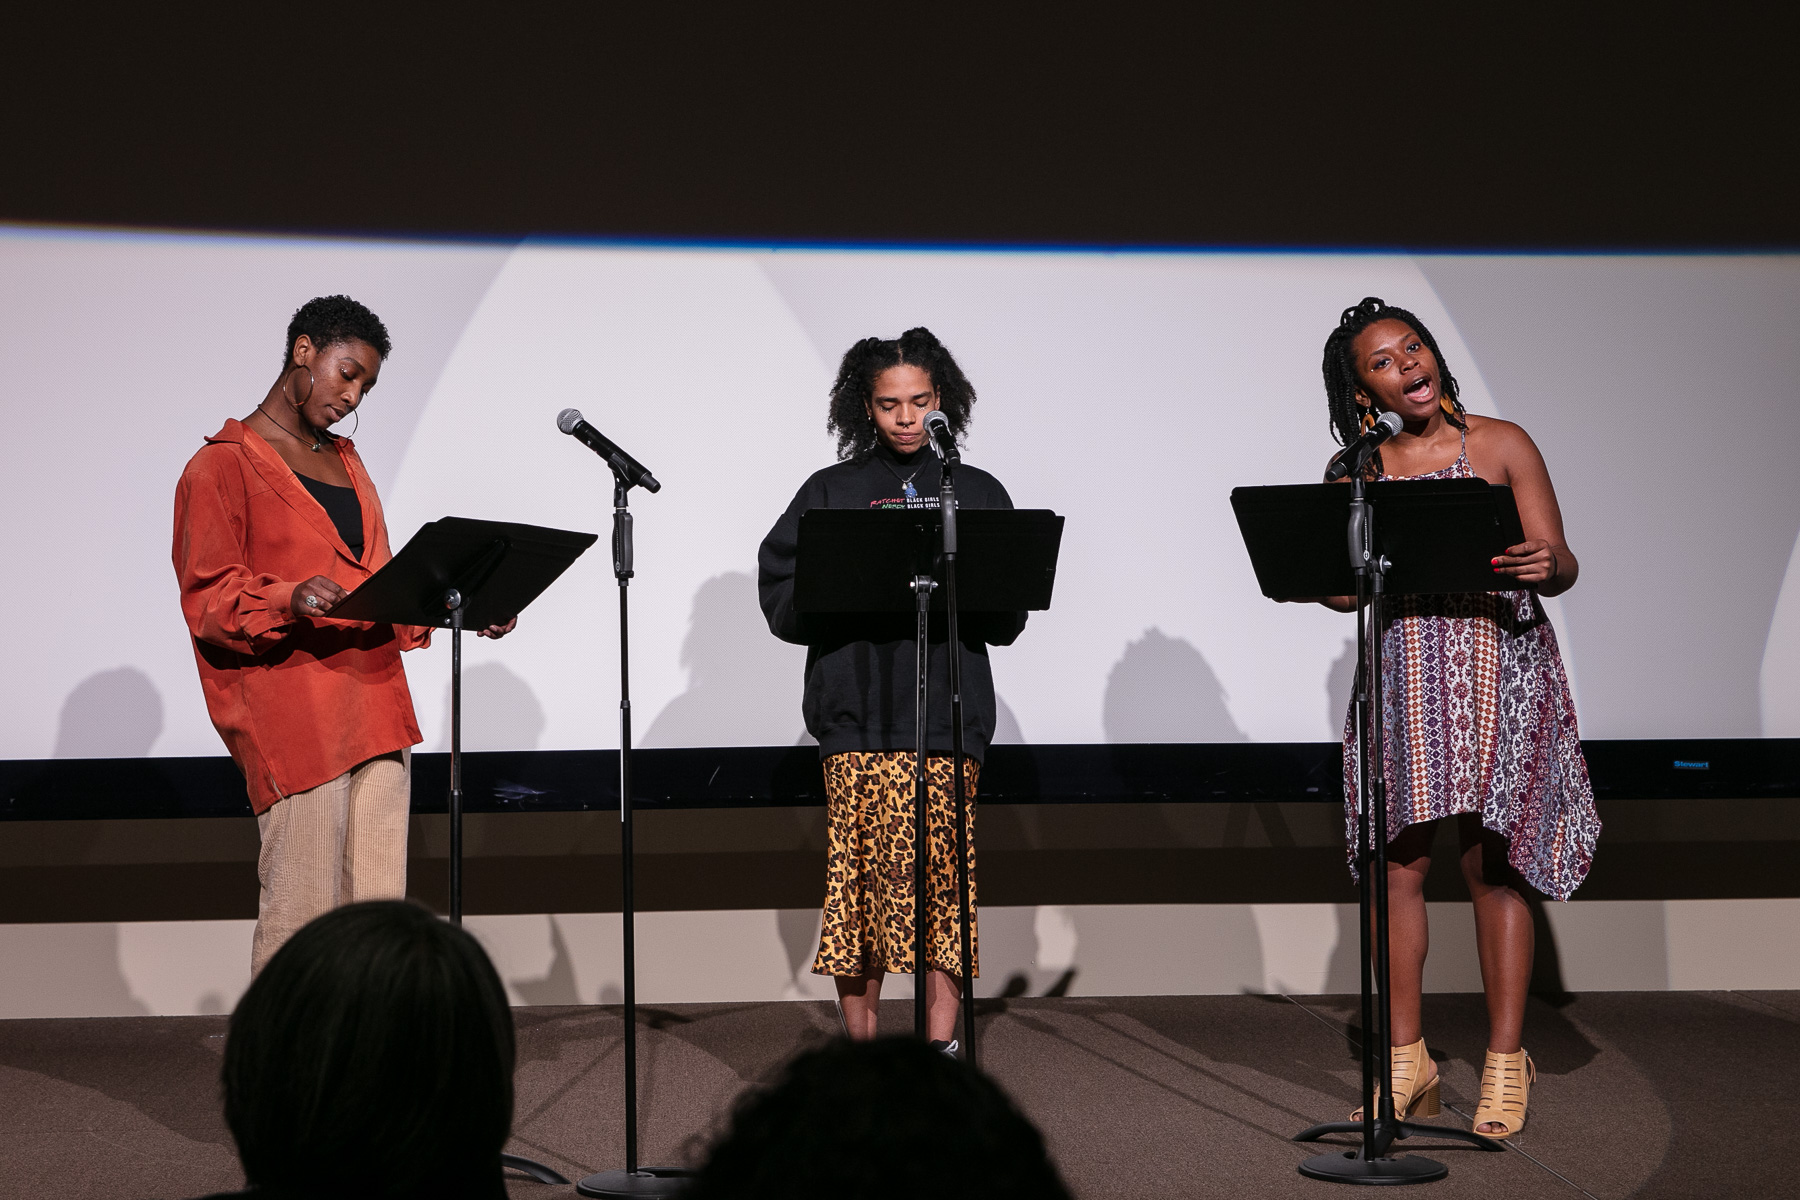 Students from The Theatre School performed a spoken word piece reflecting on Black History Month. From left to right, Jasmine Rush, Gabriella Mendoza and Kidjie Boyer. (DePaul University/Randall Spriggs)